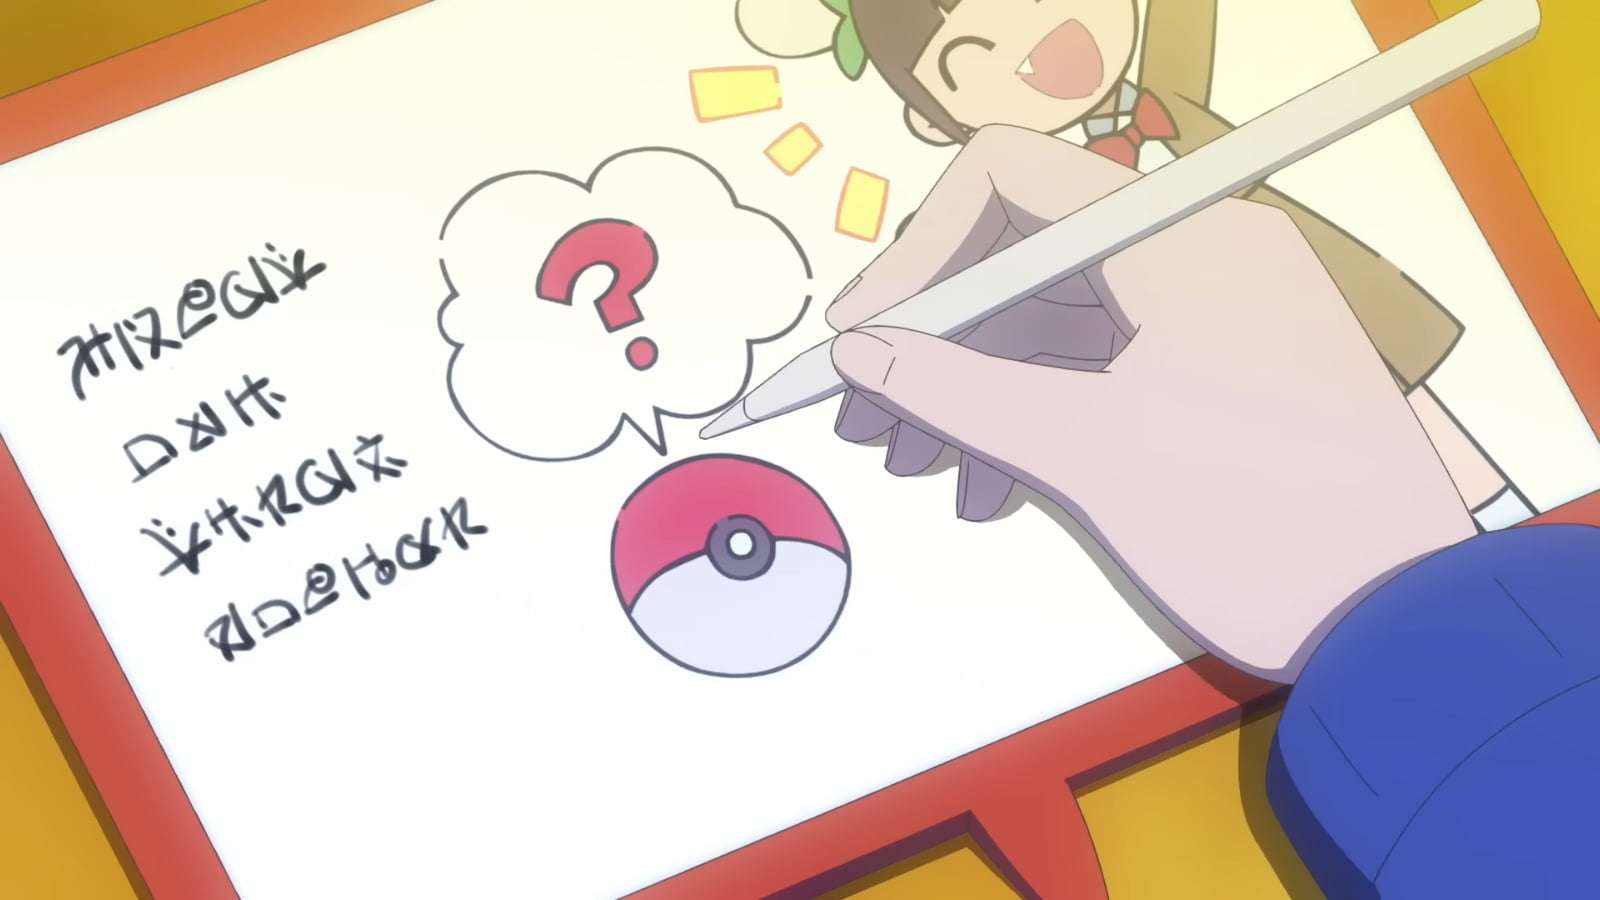 A Poke Ball drawing in the Pokemon anime